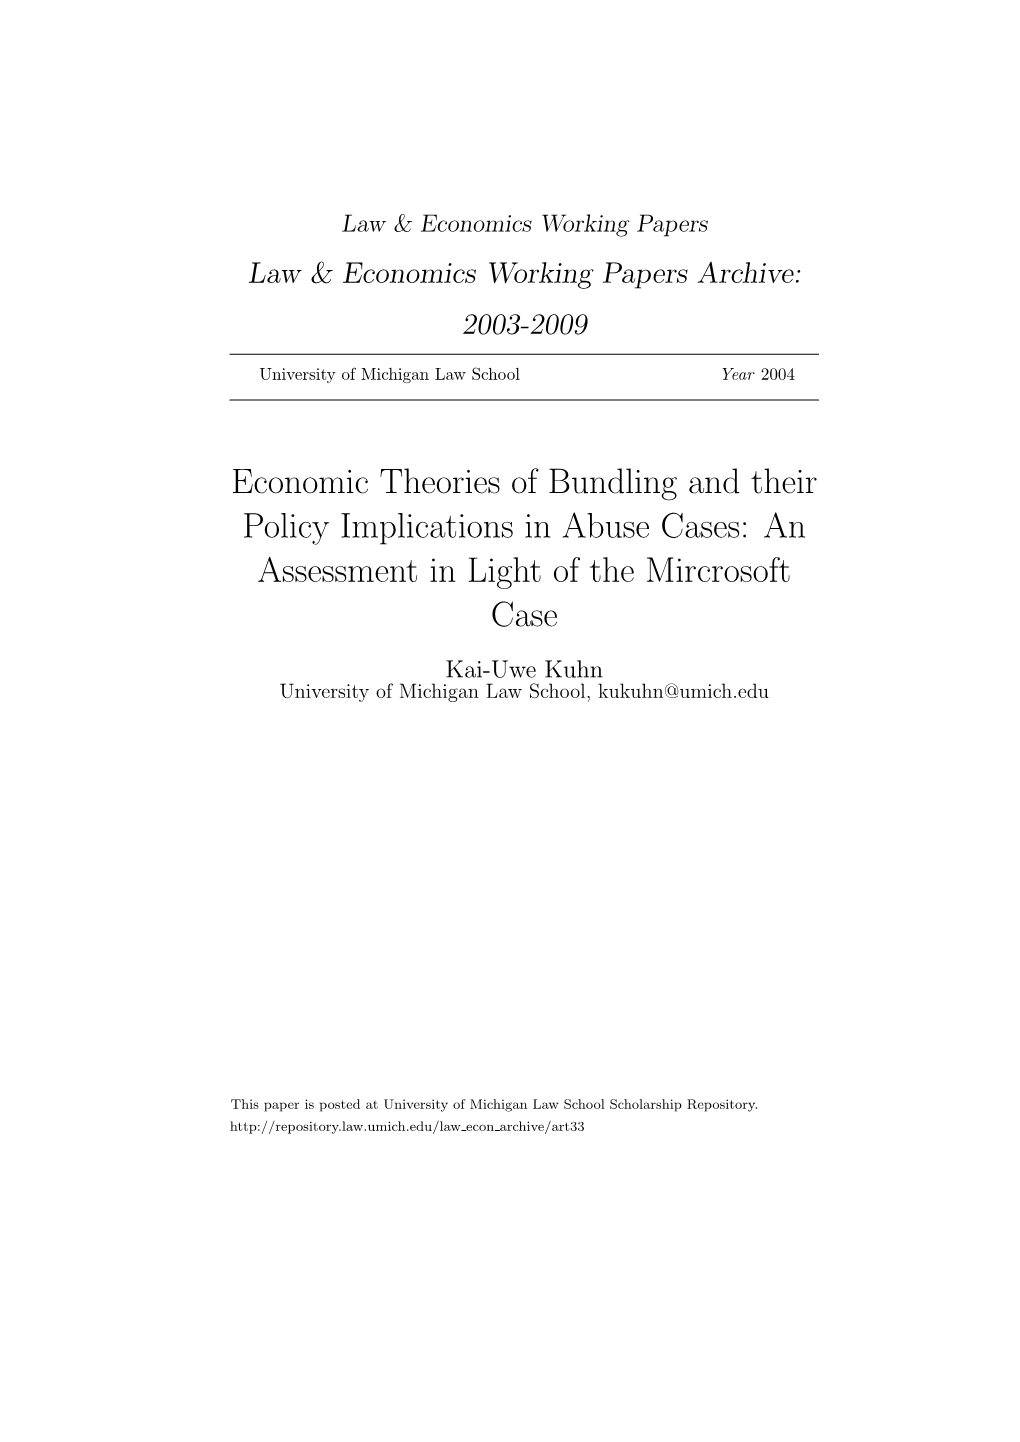 Economic Theories of Bundling and Their Policy Implications in Abuse